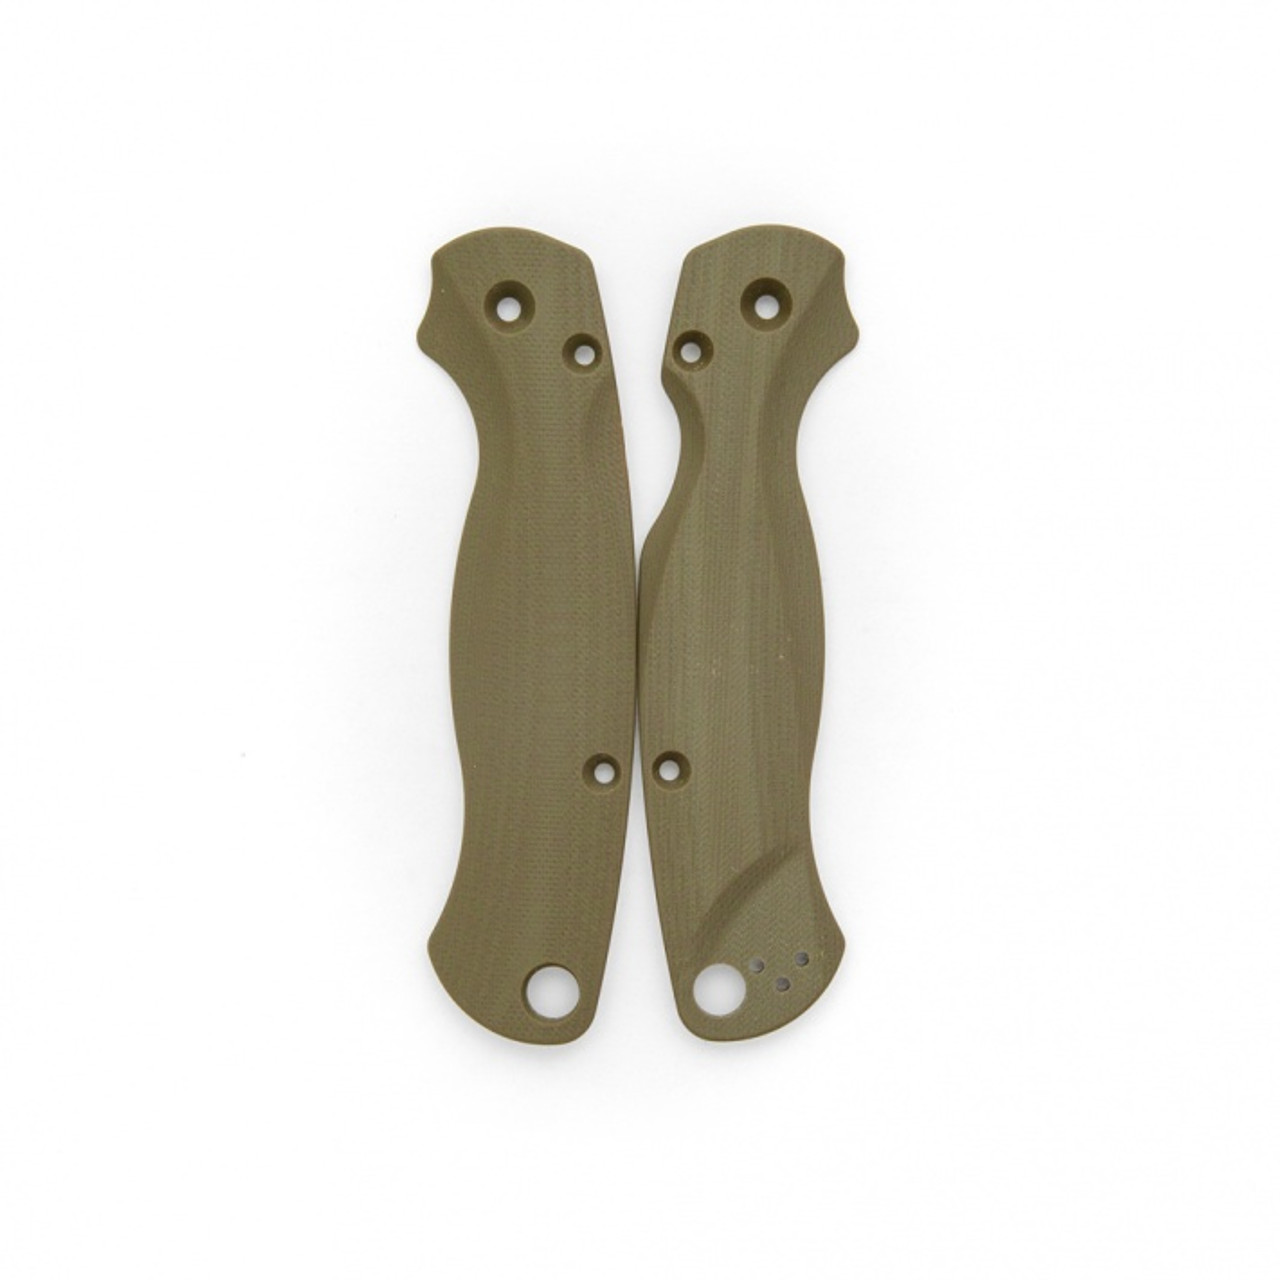 Flytanium Lotus Olive Green G10 Scales for Spyderco PM2